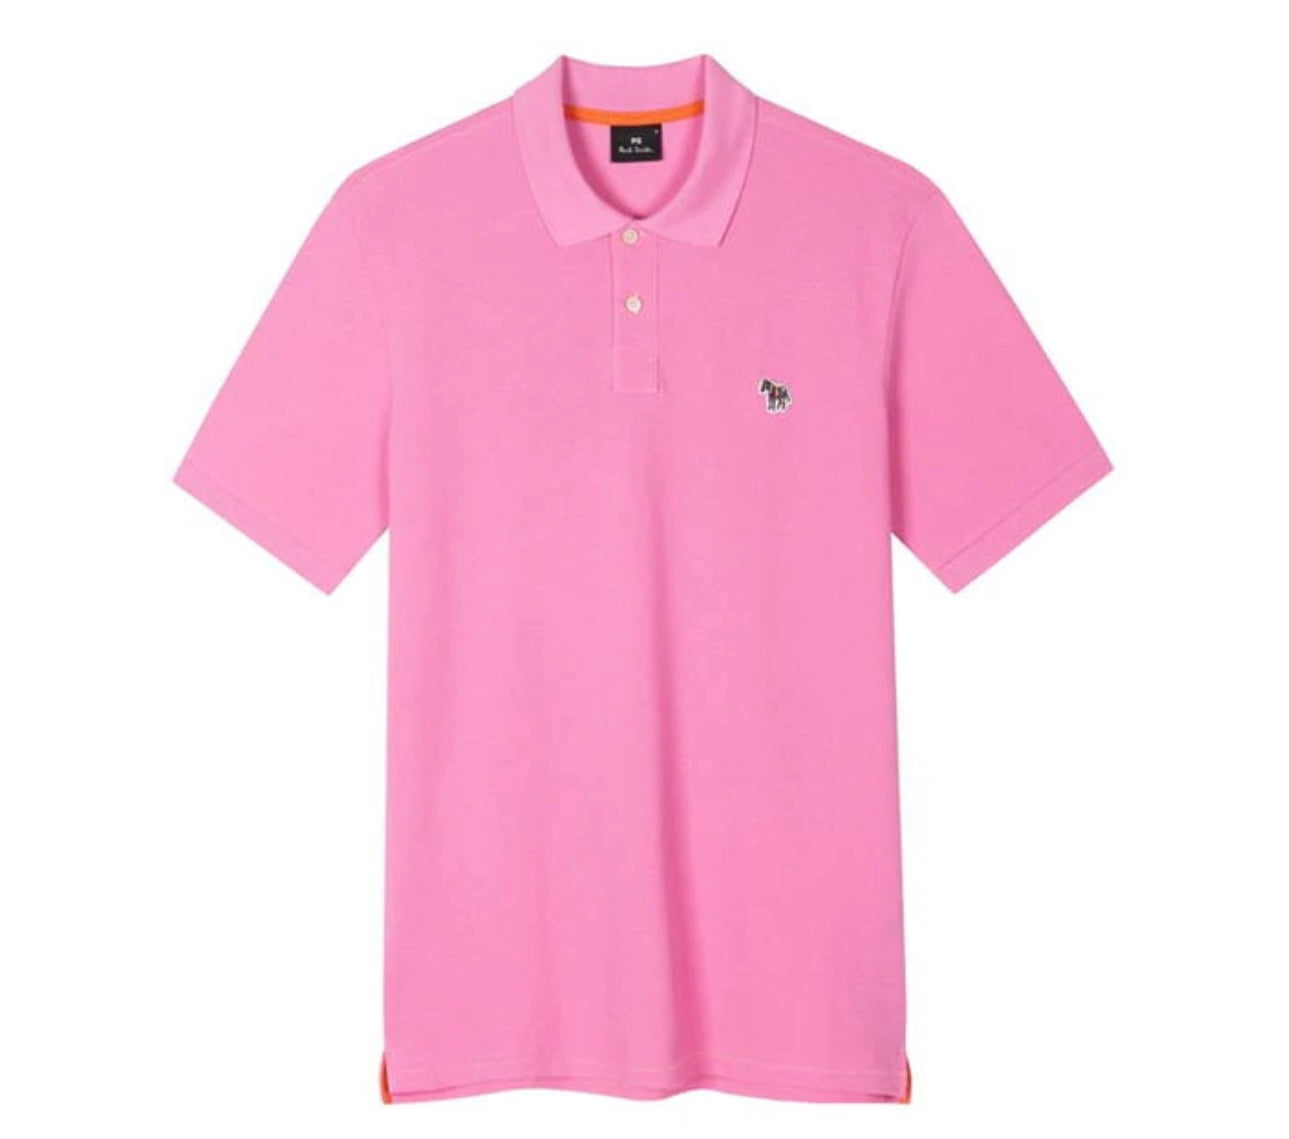 PAUL SMITH EMBROIDERED ZEBRA POLO SHIRT PINK